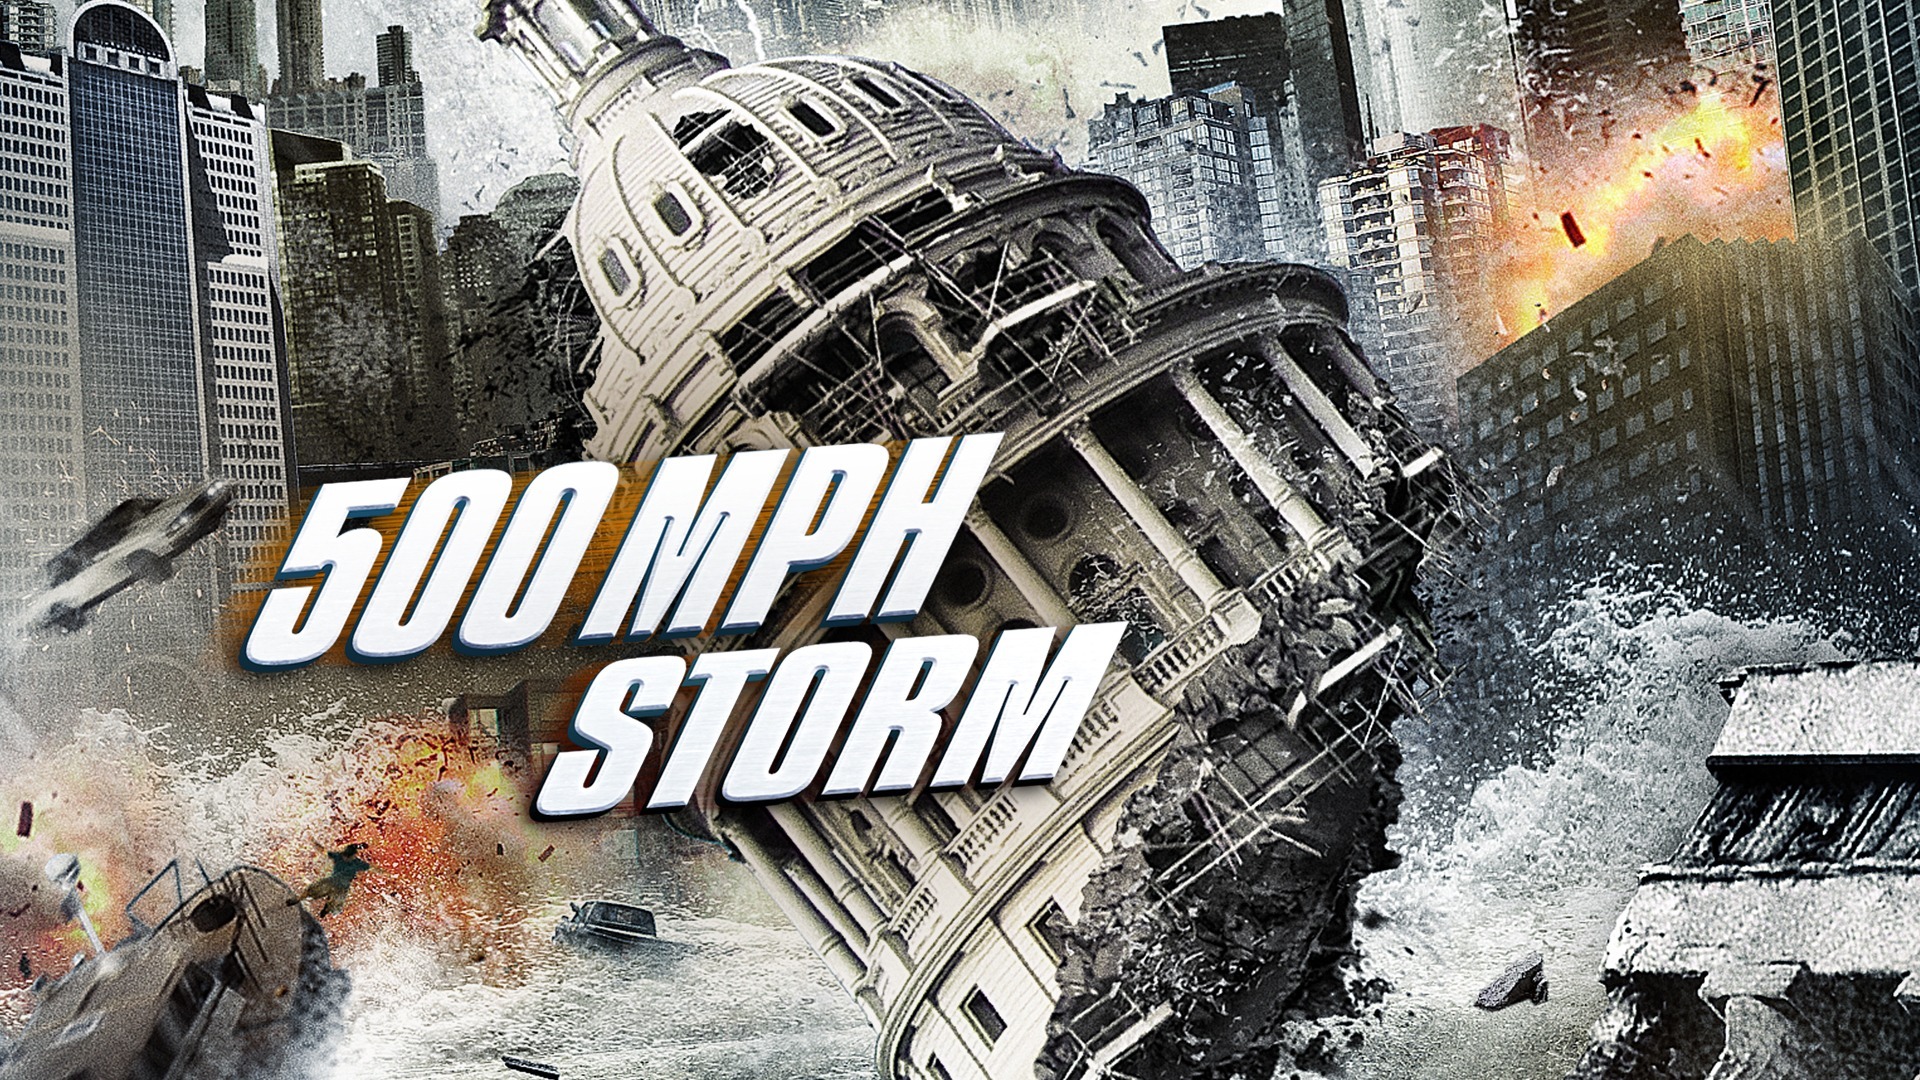 500 MPH Storm 2013 drive in movie channel